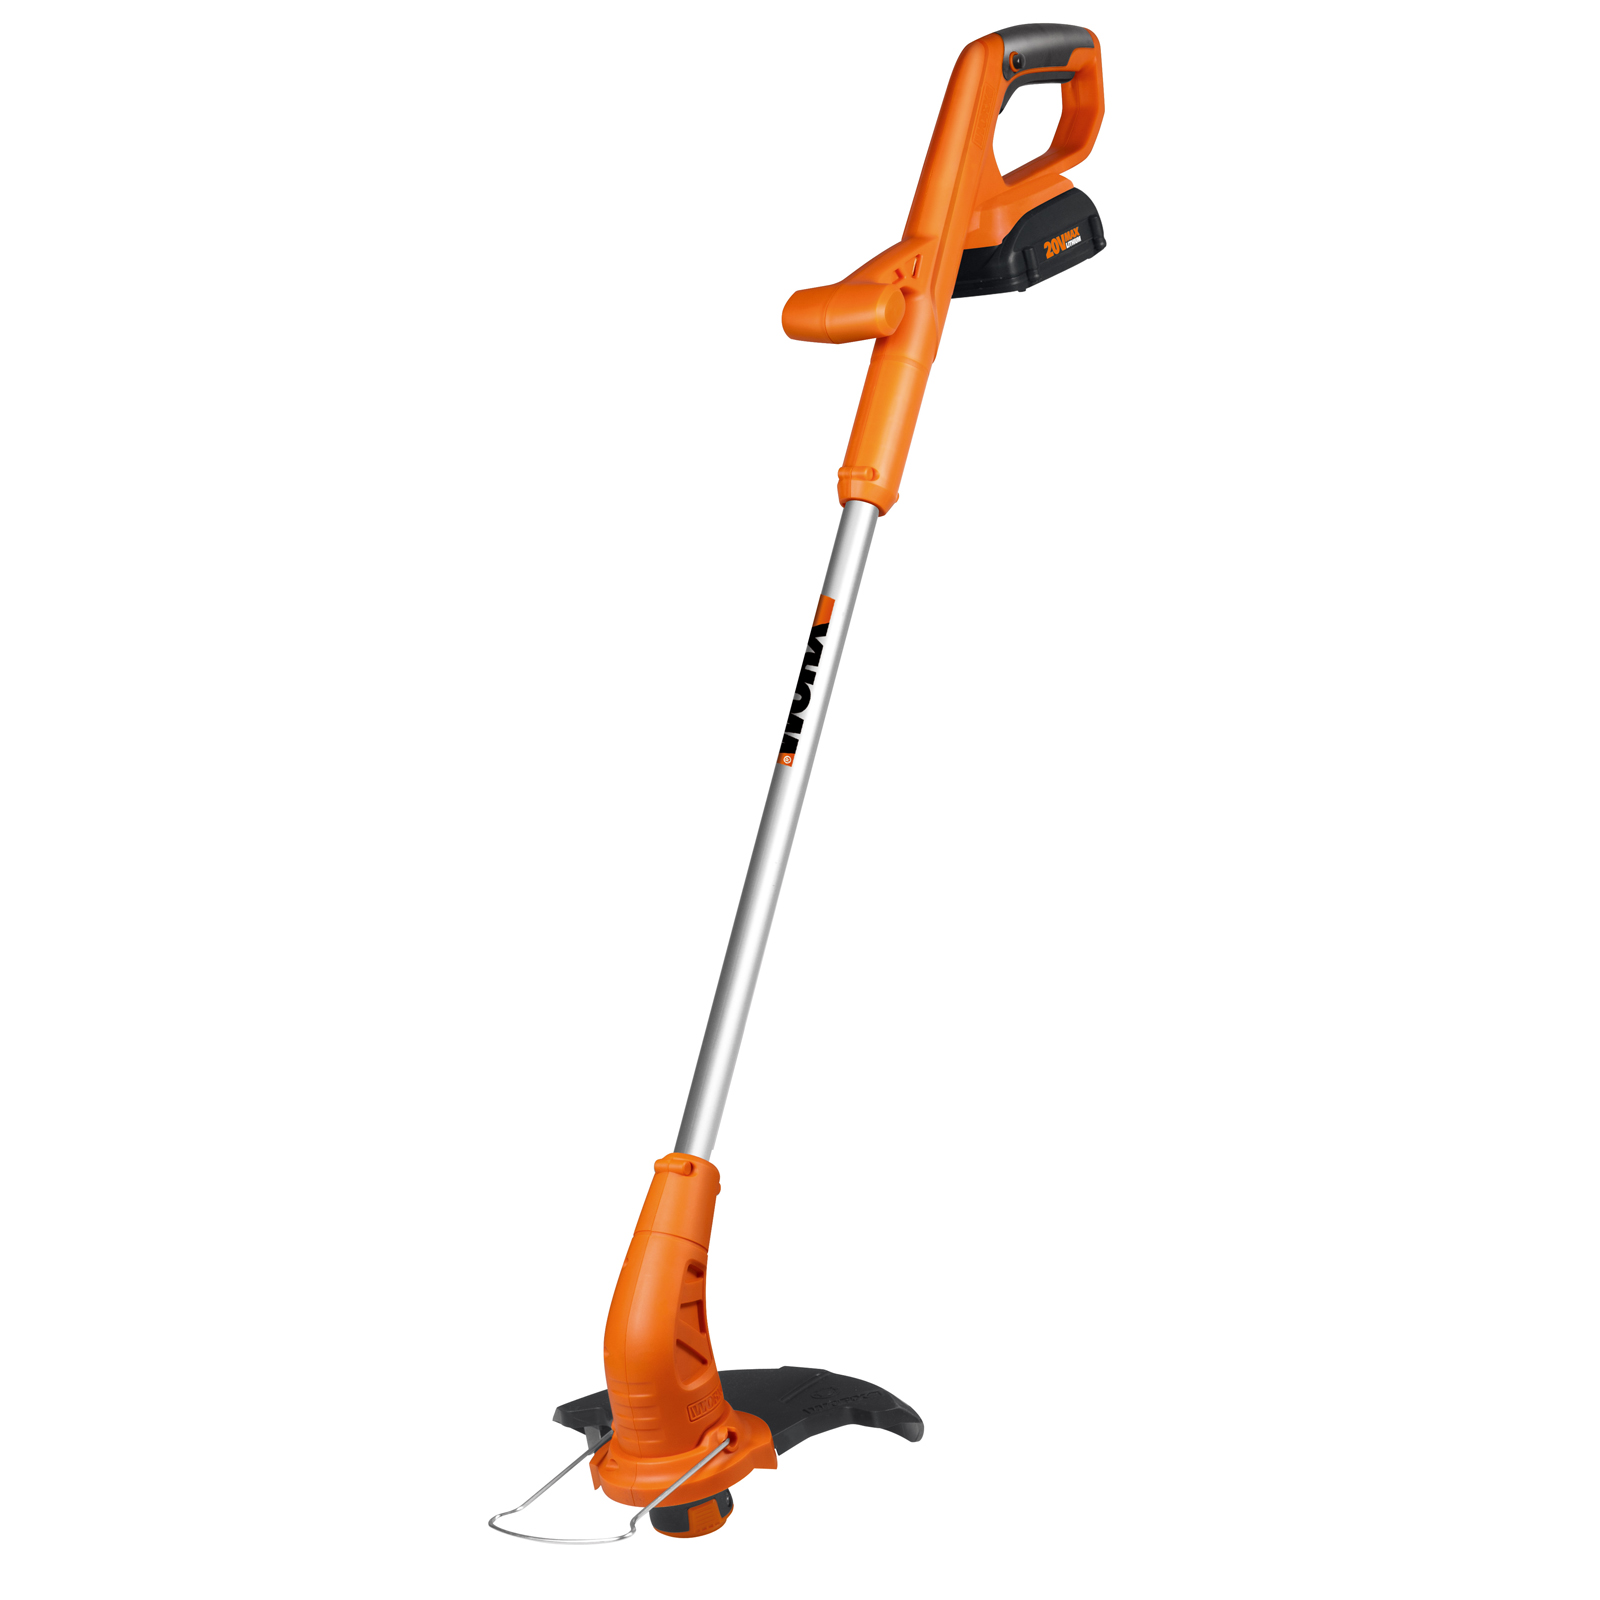 Tools for women - My new weed trimmer edger